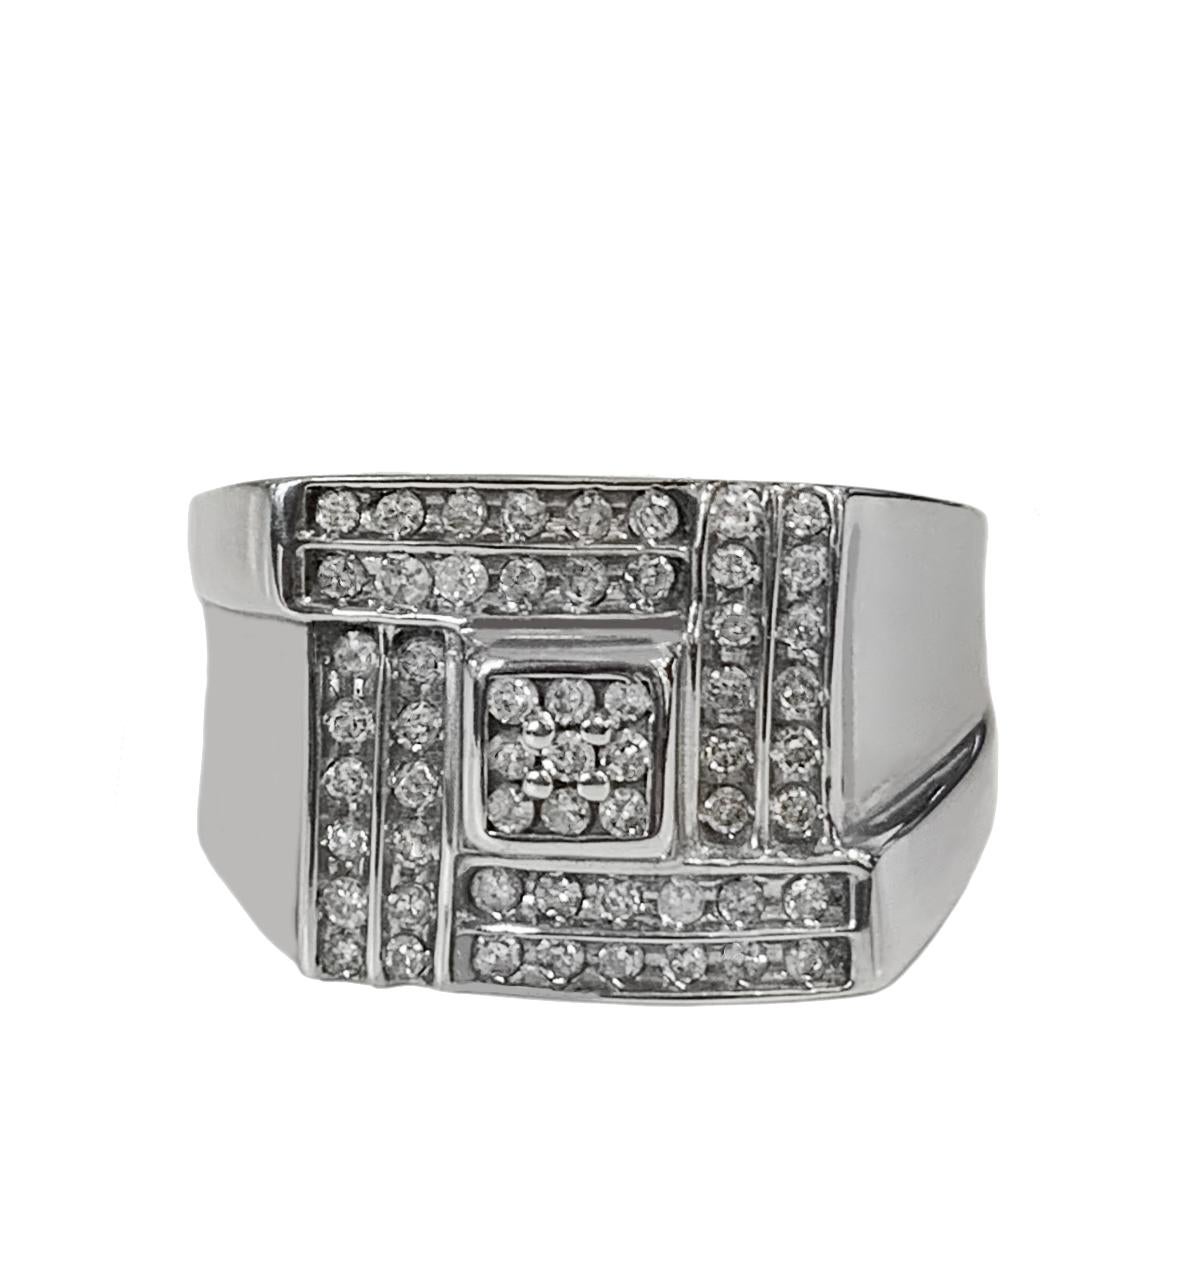 -Custom made

-14k White gold

-Ring size: 10

-Weight: 5.9gr

-Ornament dimension: 0.5x0.5”

-Diamonds:1.00ct, SI clarity, G color